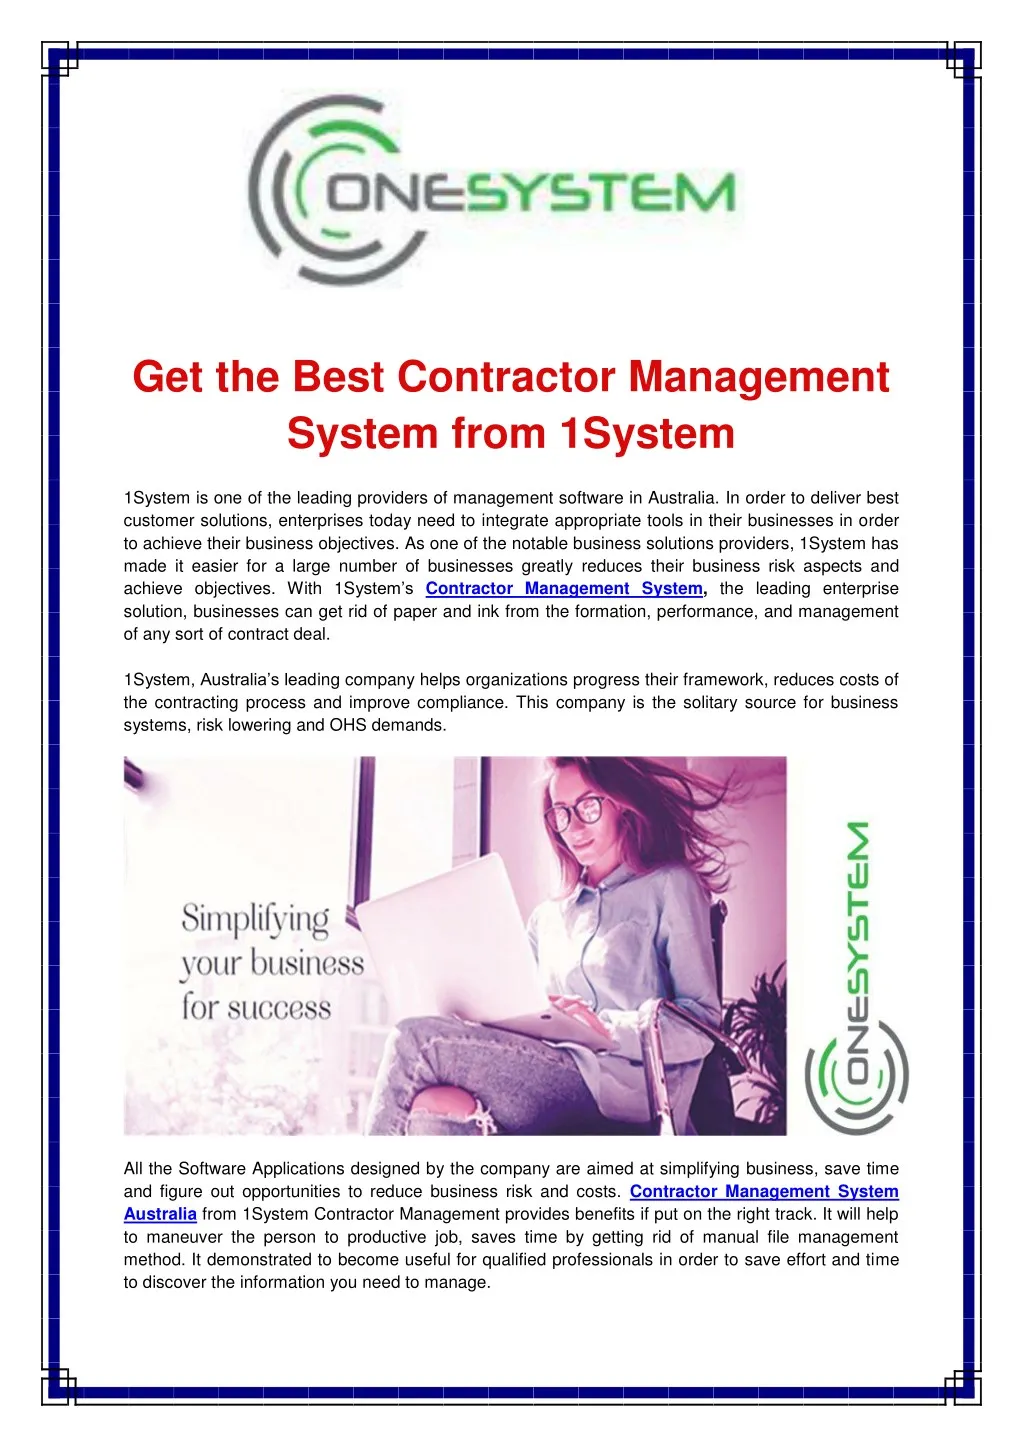 get the best contractor management system from